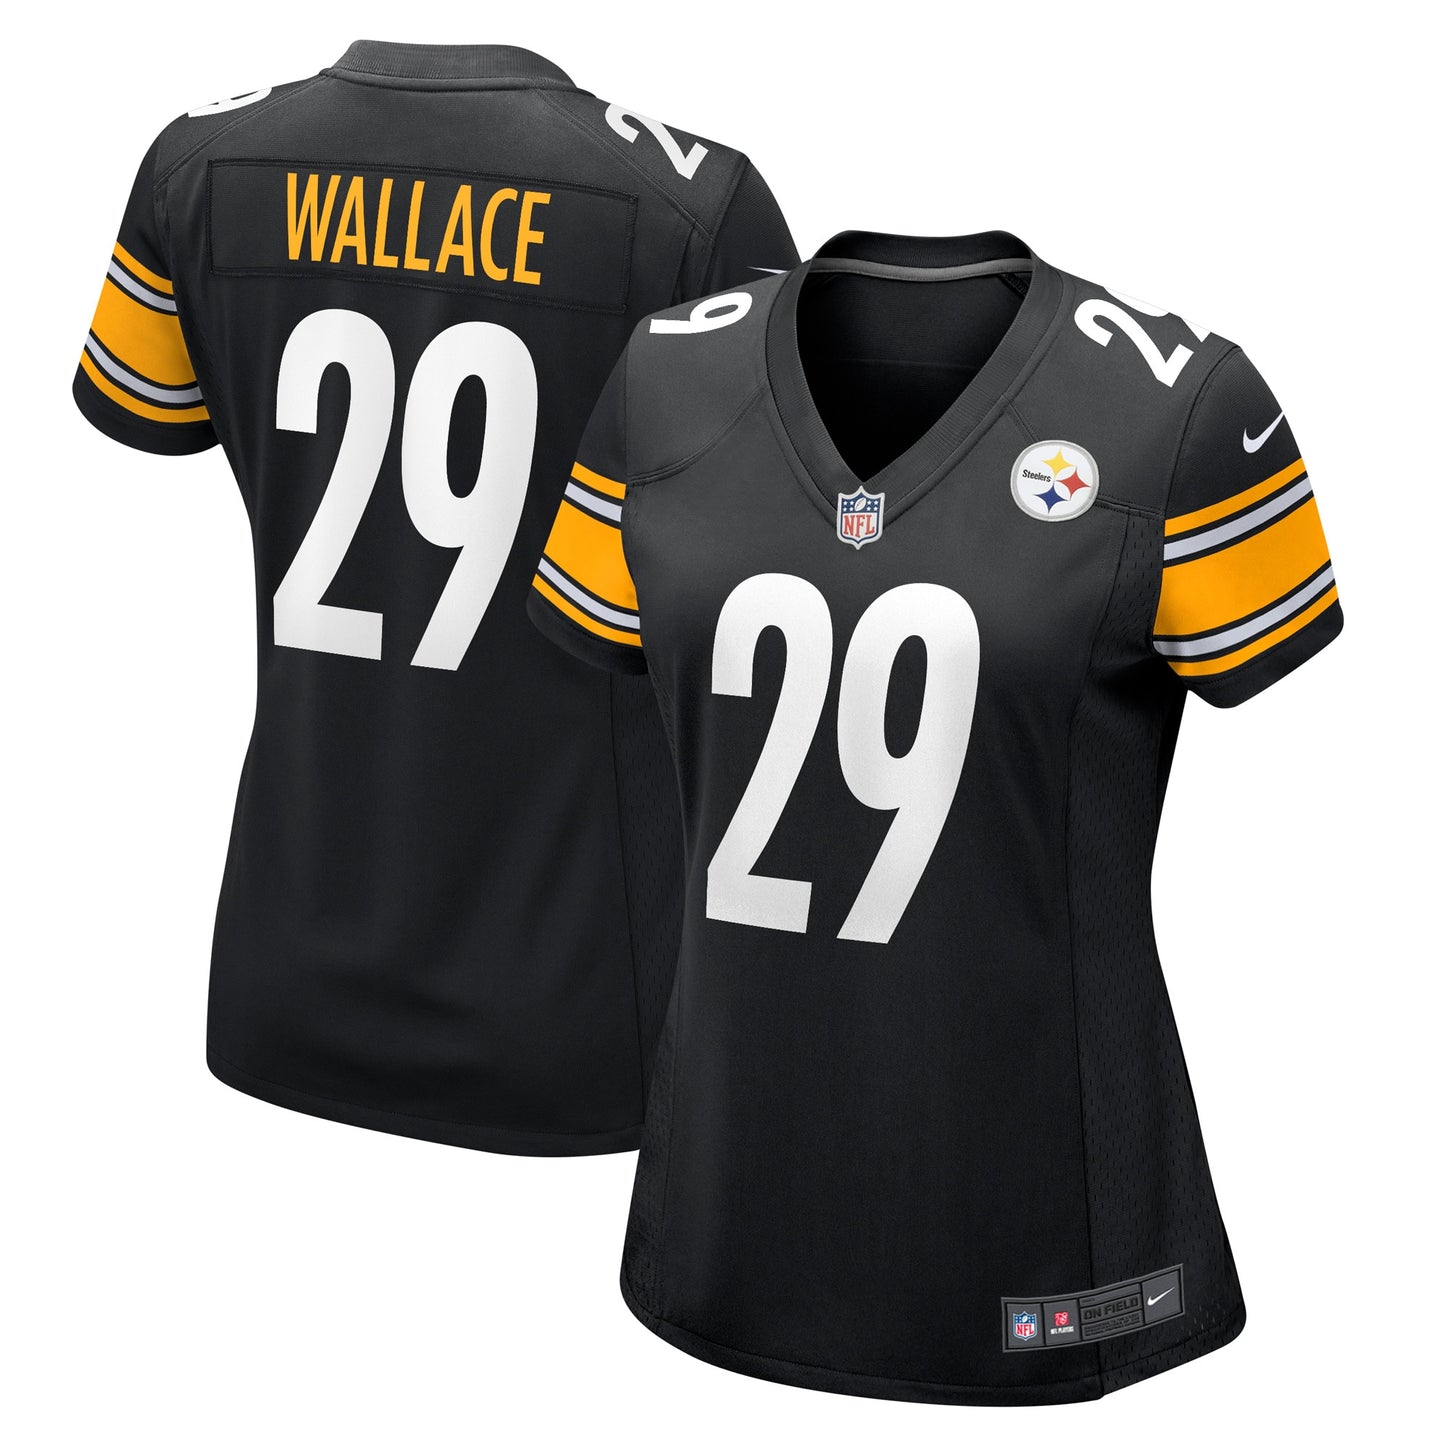 Levi Wallace Pittsburgh Steelers Nike Women's Game Player Jersey - Black